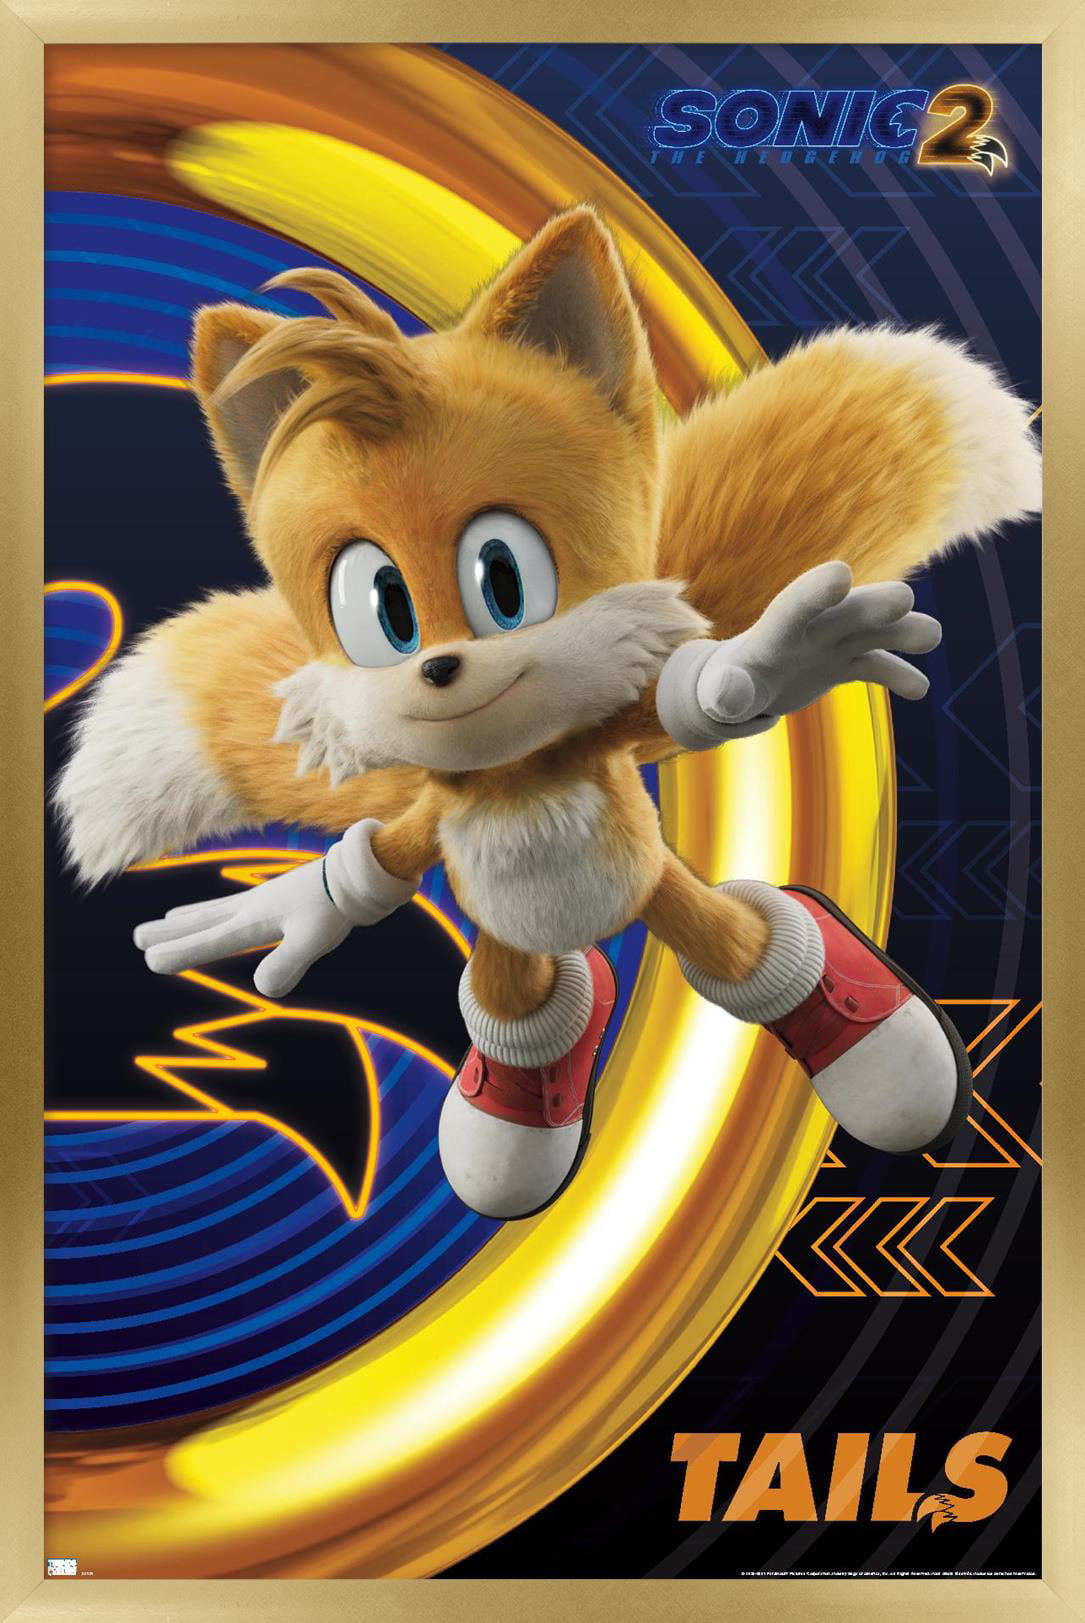 Sonic The Hedgehog movie poster (h) - 11 x 17 inches - Sonic